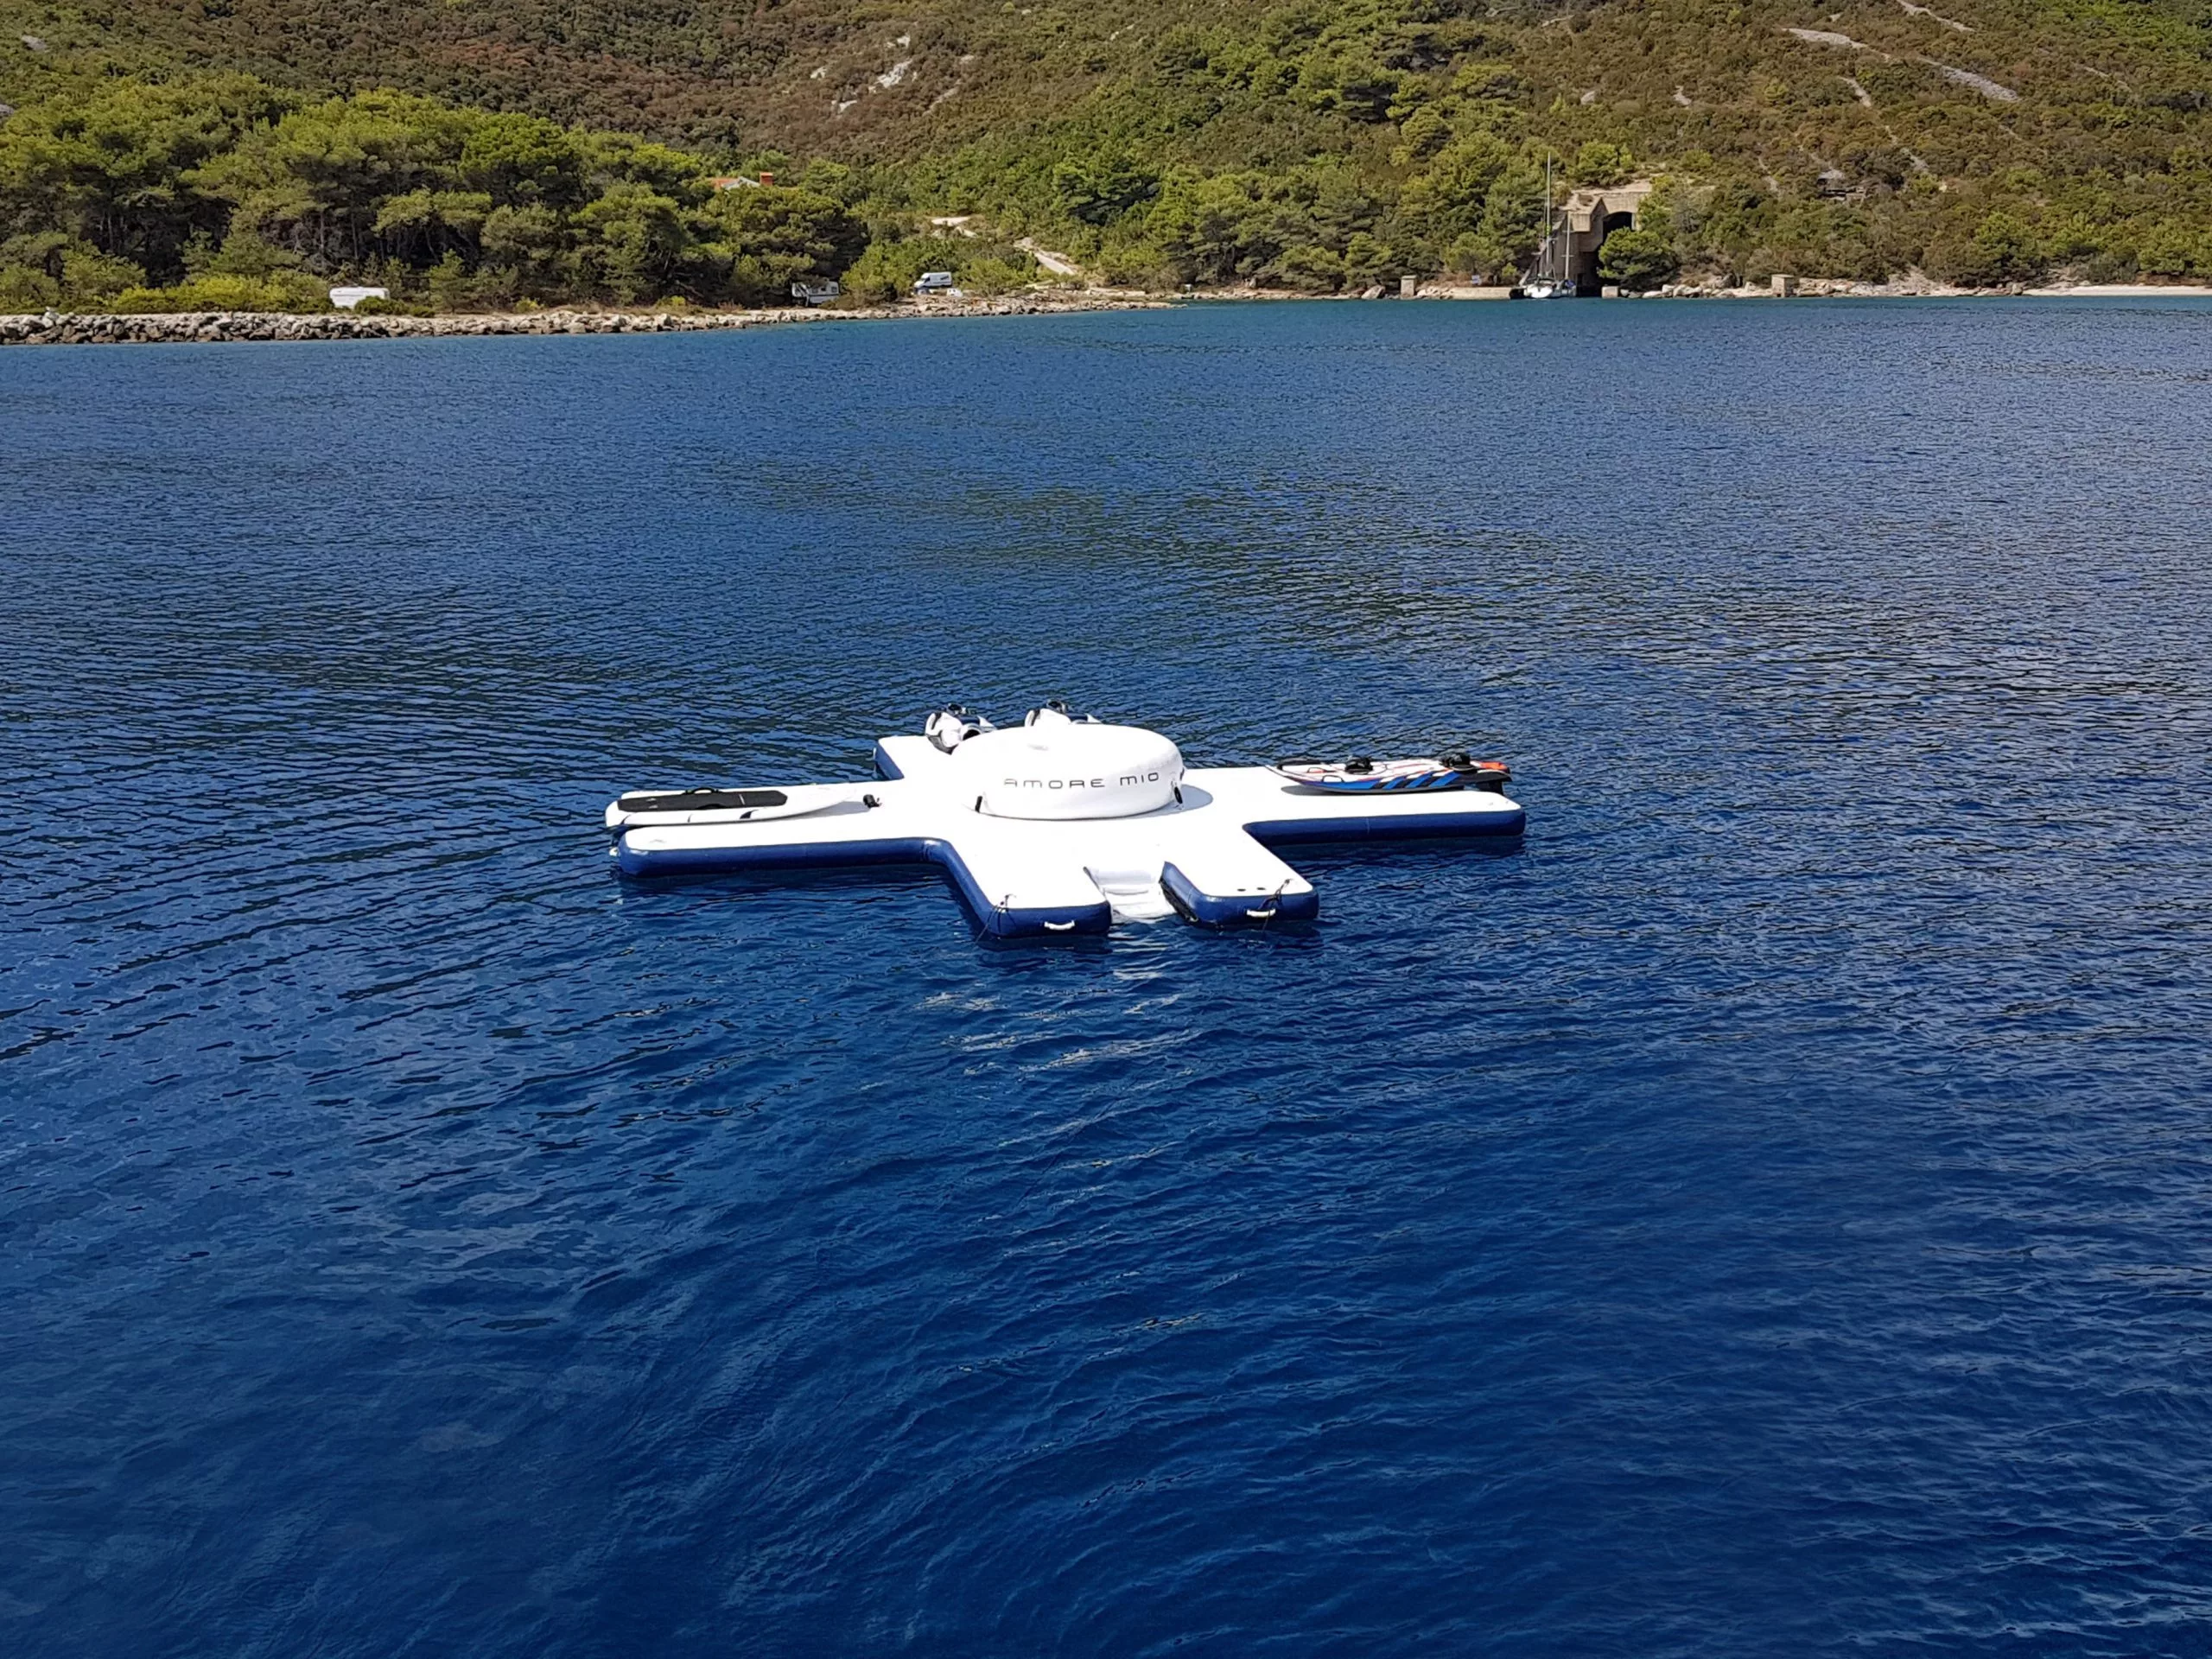 Custom Toy Island from charter superyacht Amore Mio